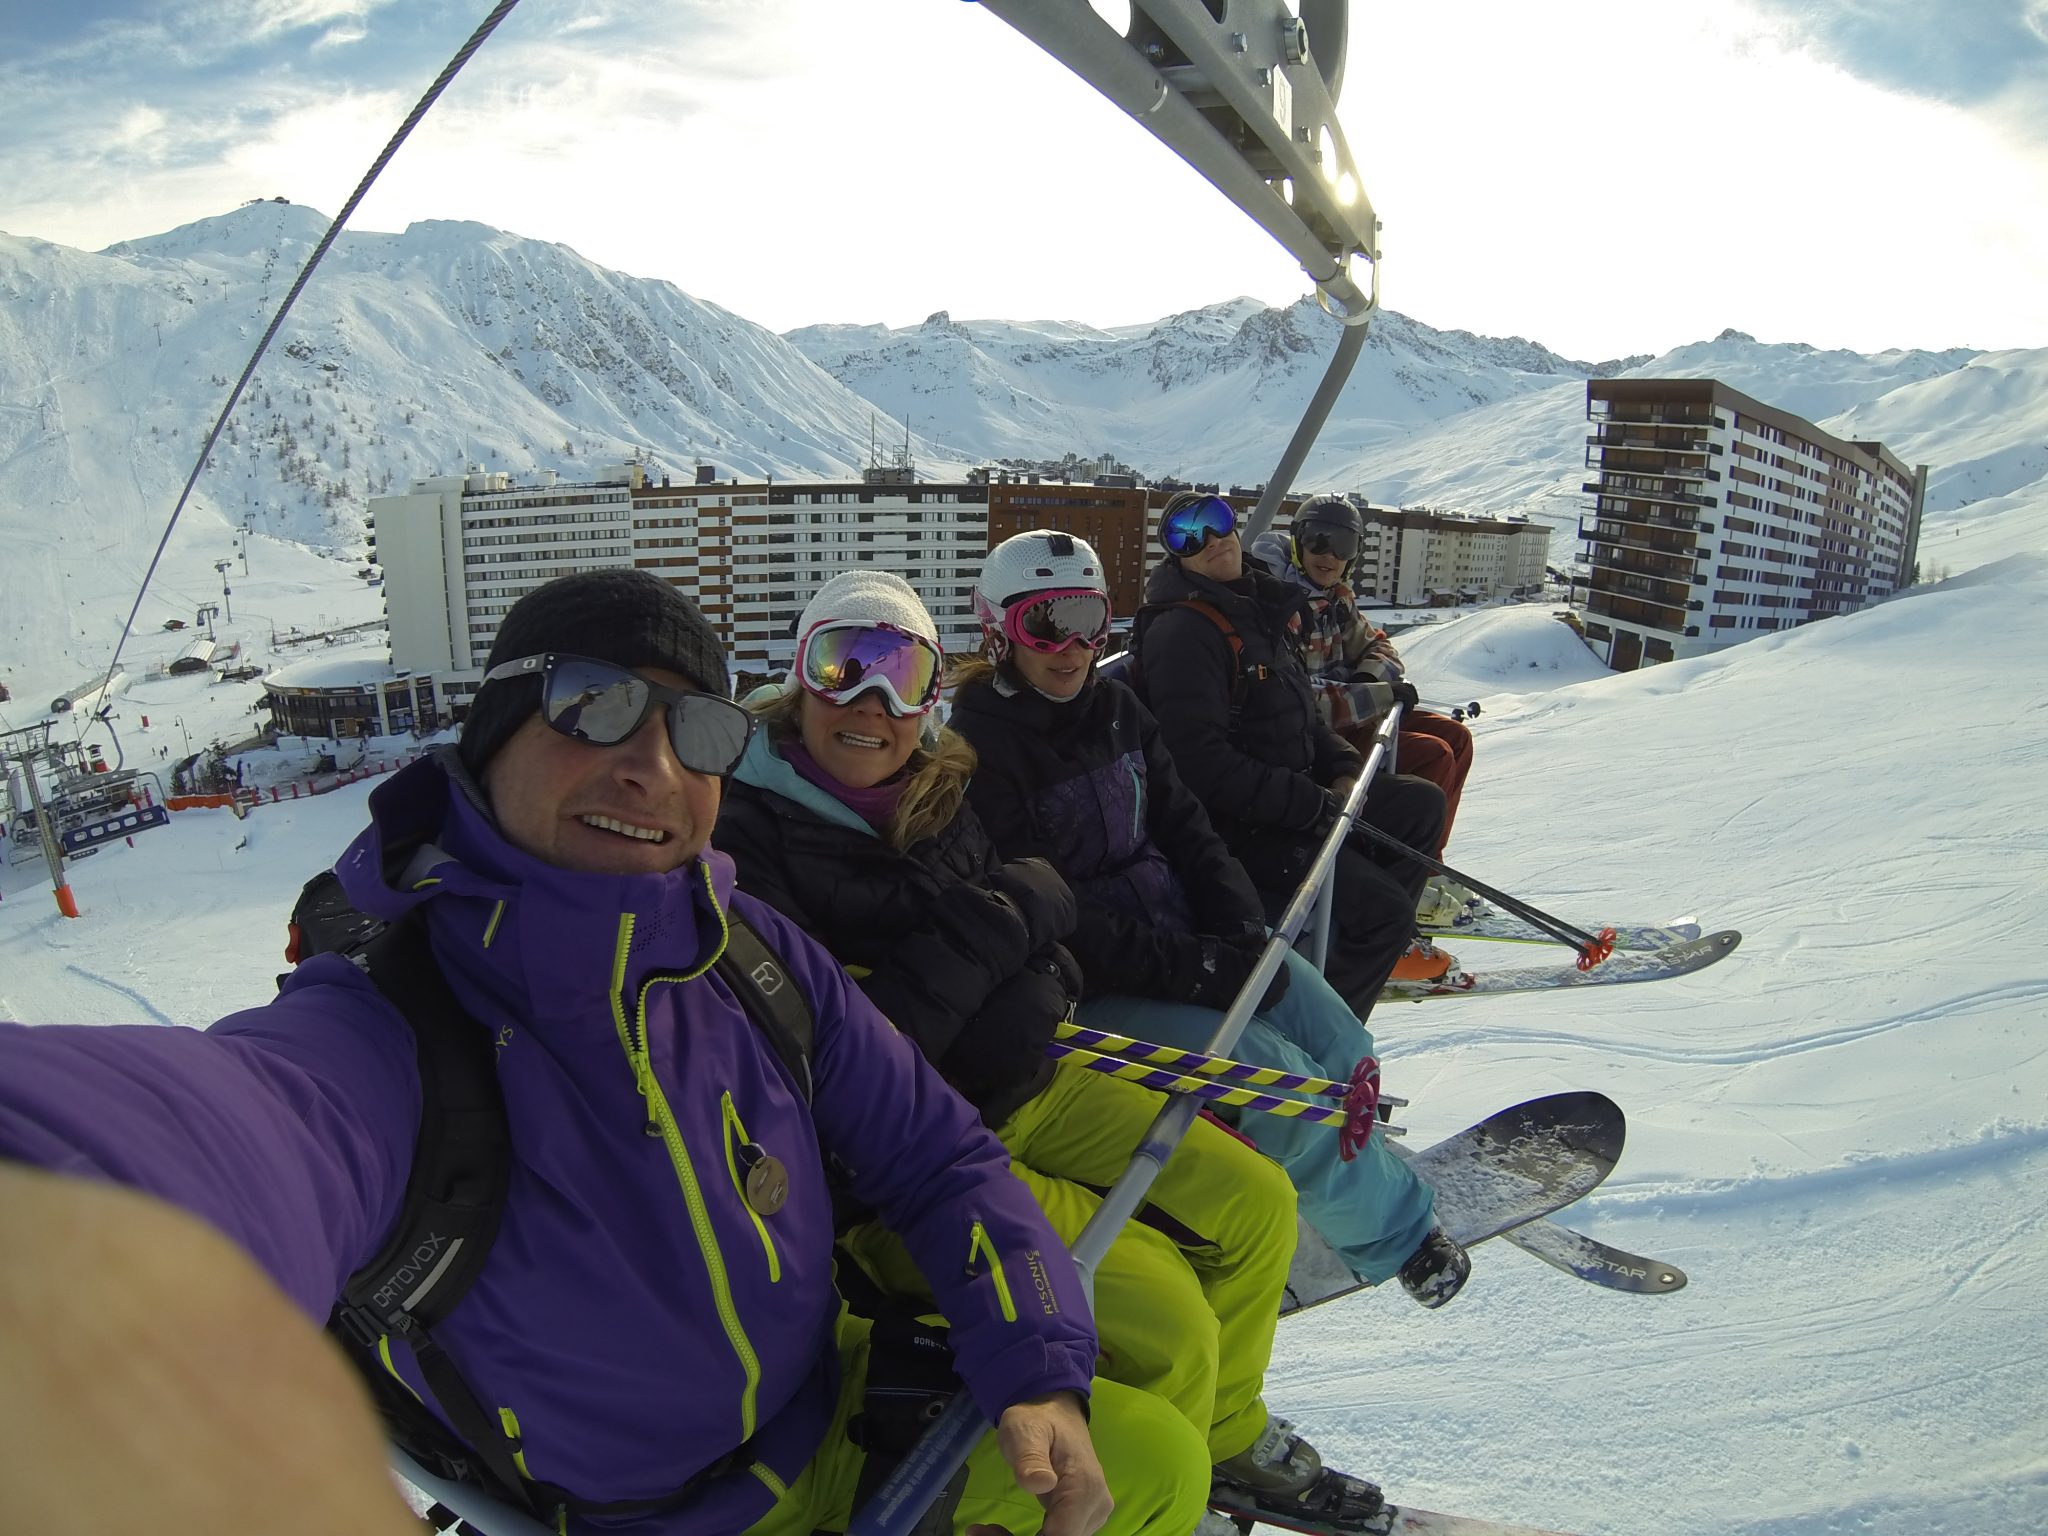 opening in Val d' Isere 7